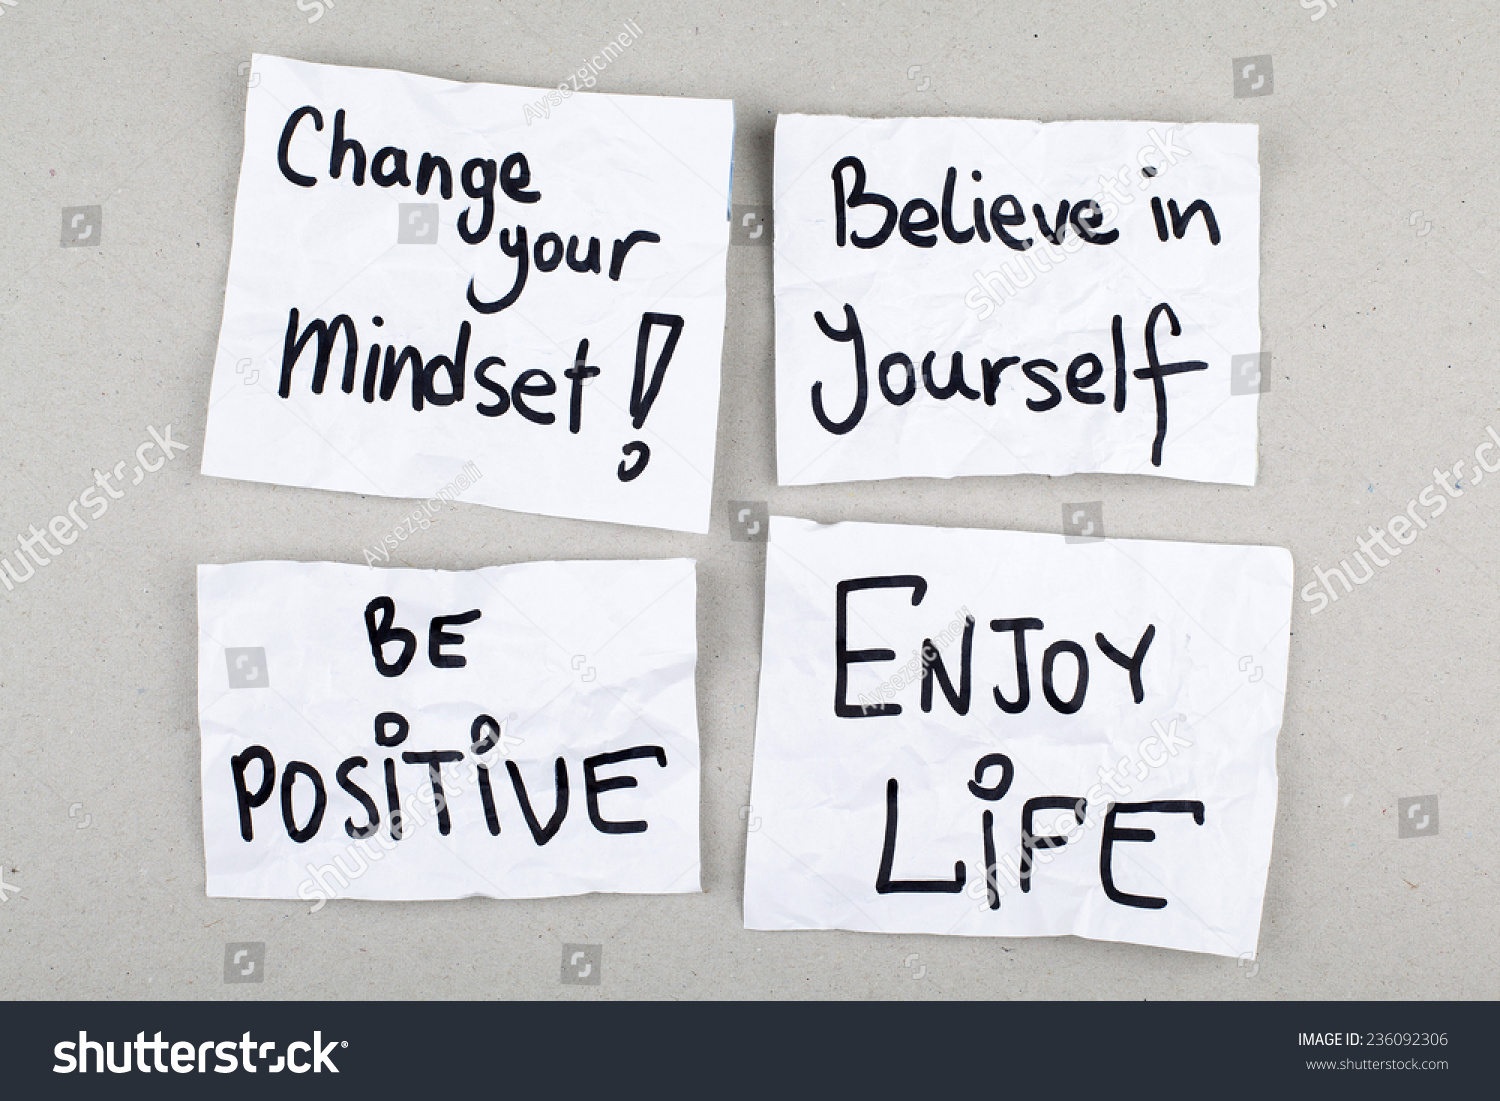 Motivational Inspirational Positive Quotes Phrases Change Your Mindset Believe in Yourself Be Positive